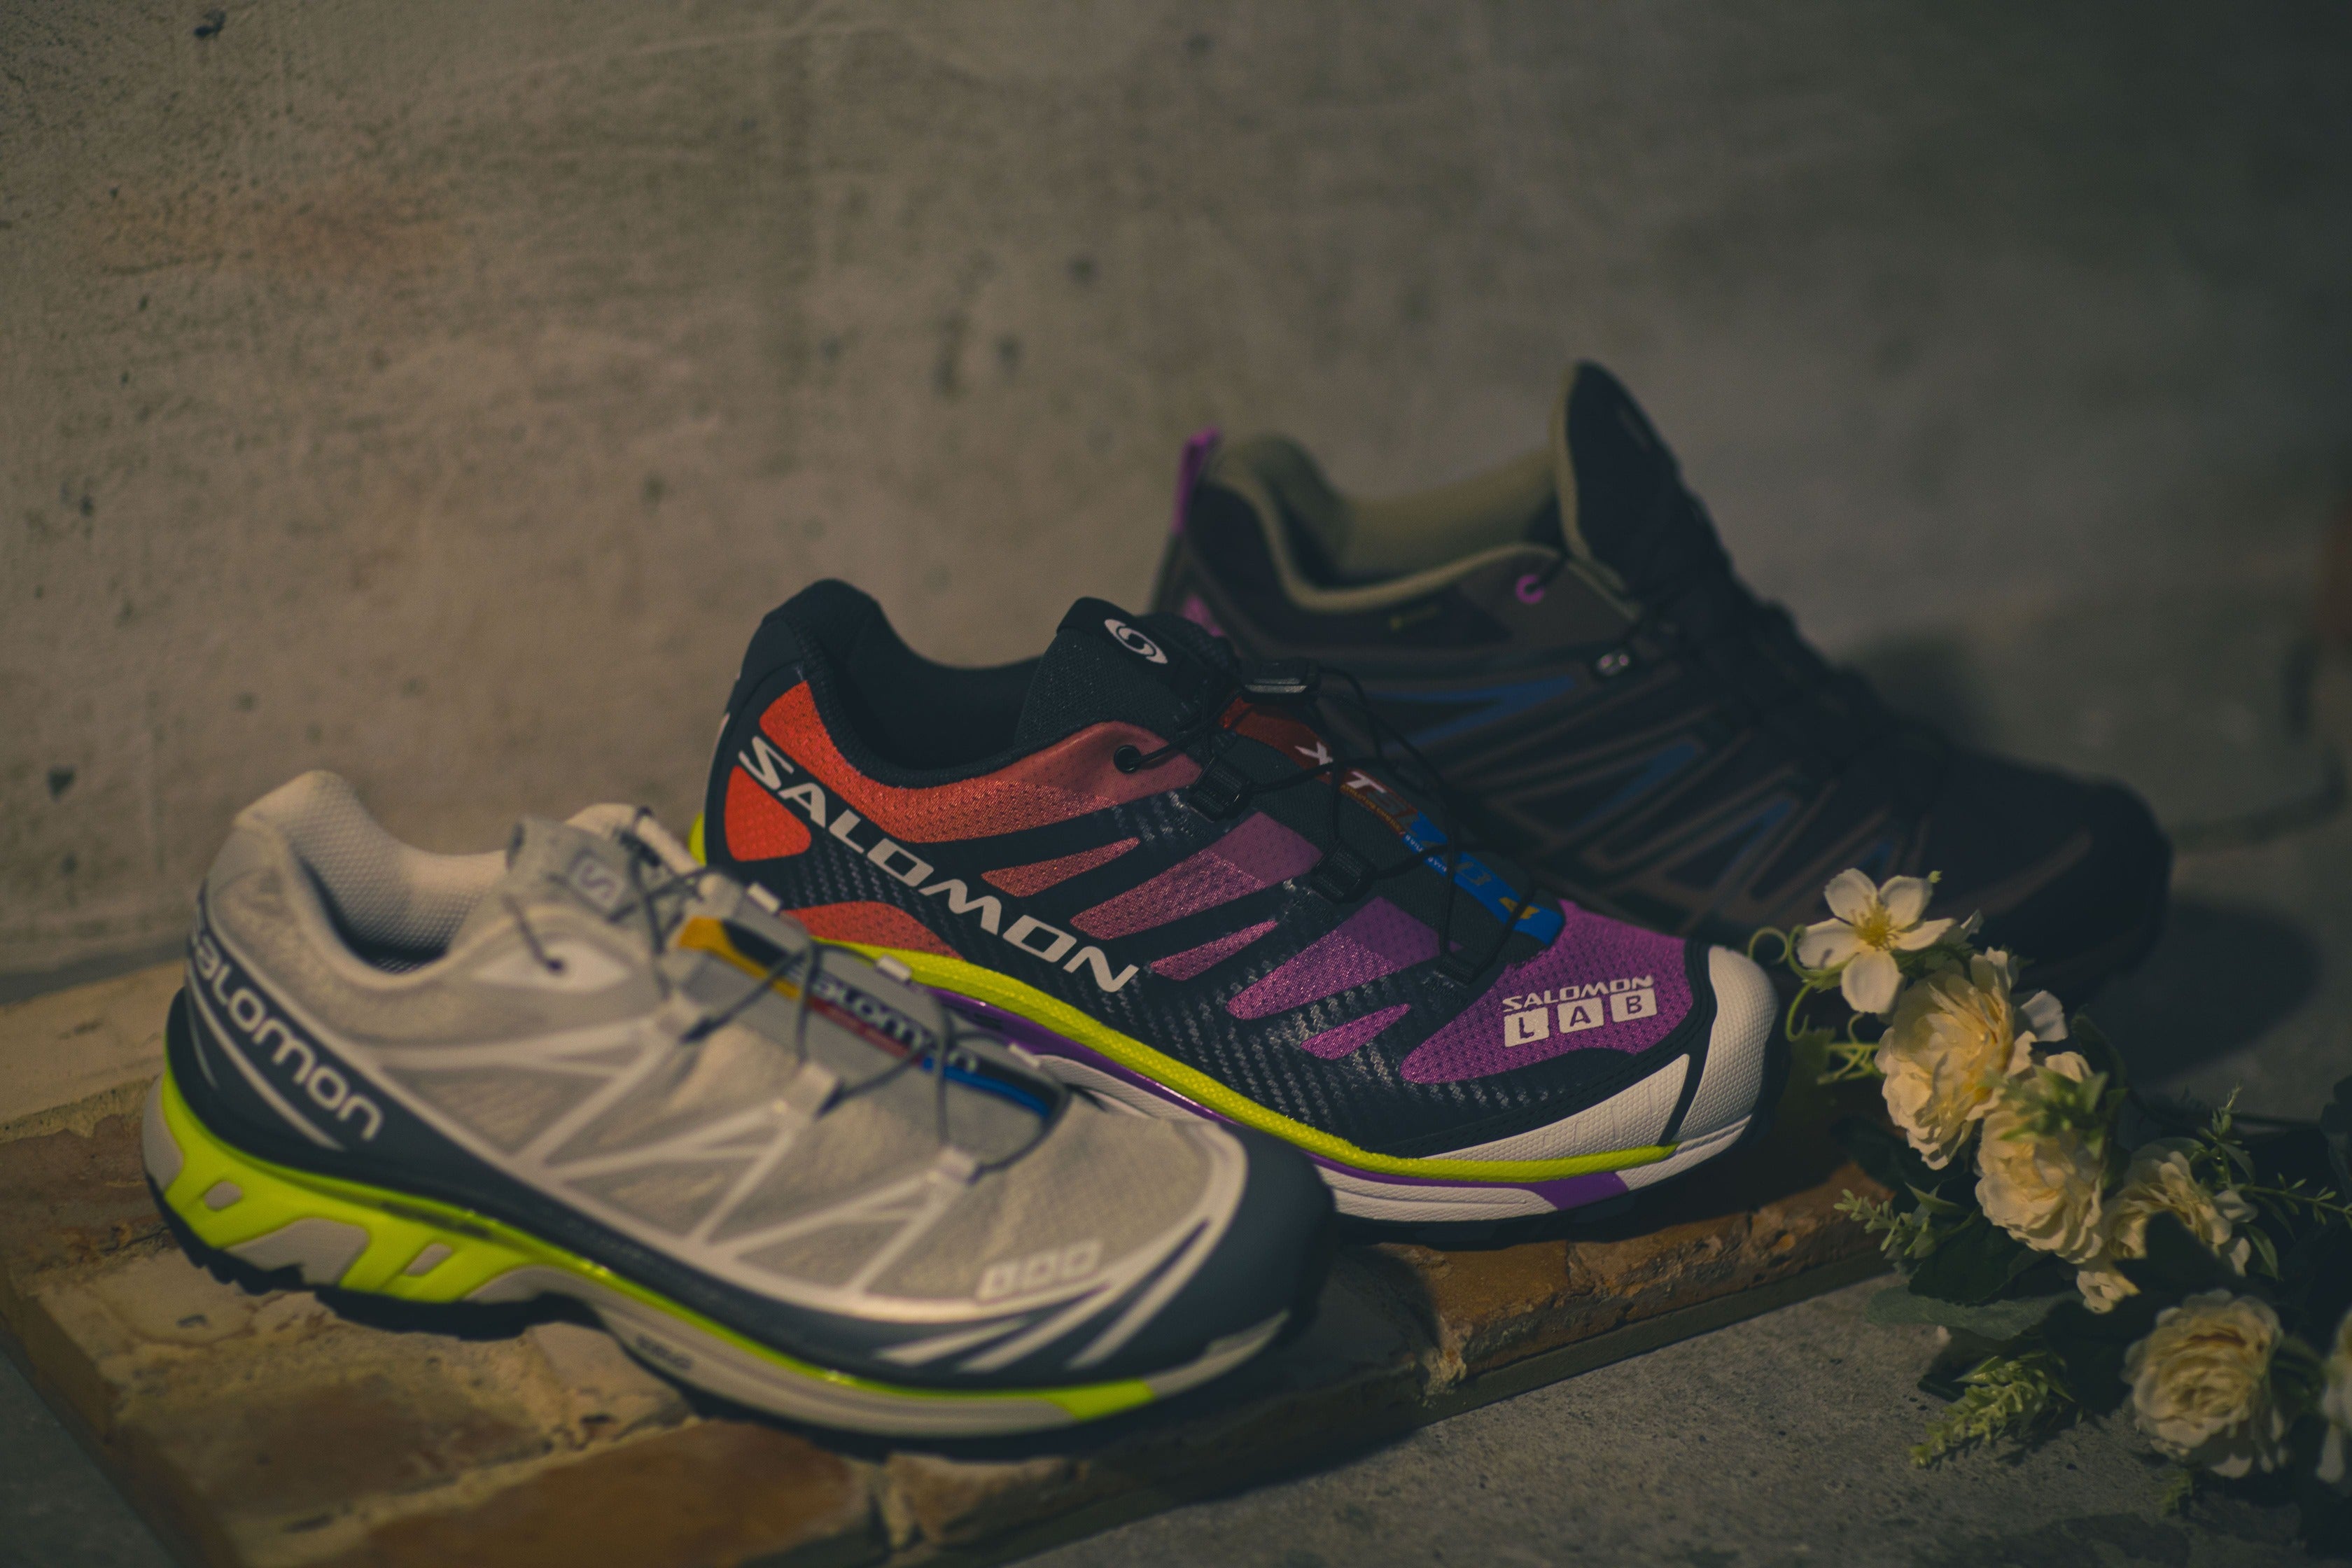 besked jernbane Hemmelighed SNEAKER FEATURE: NEW ARRIVALS FROM SALOMON - FEATURING COLLABORATION W –  JUICESTORE